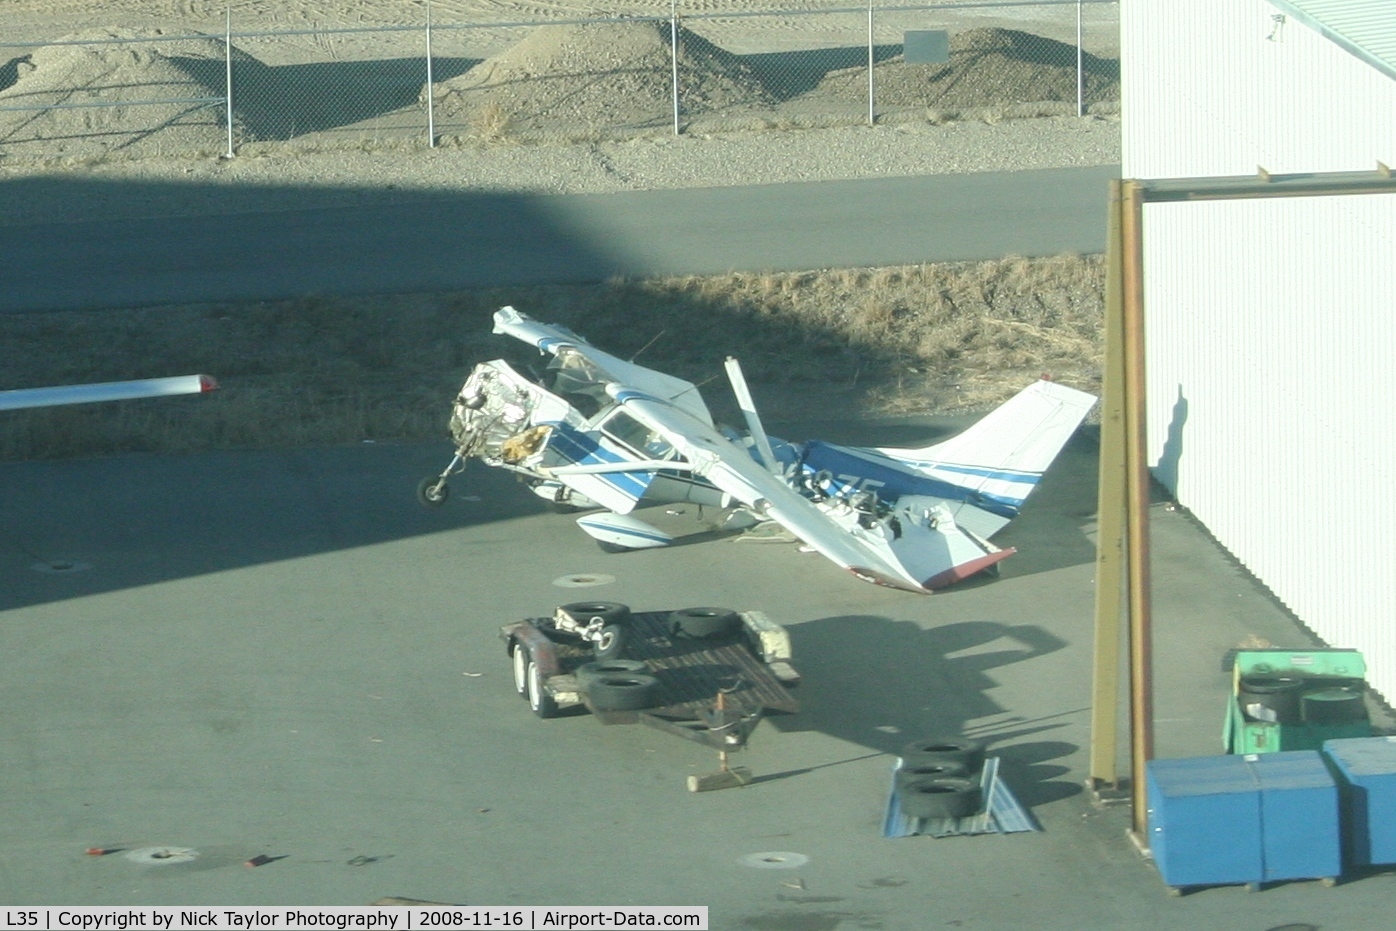 Big Bear City Airport (L35) - Unknown N Number Cessna wreckage. If you have info please let me know.